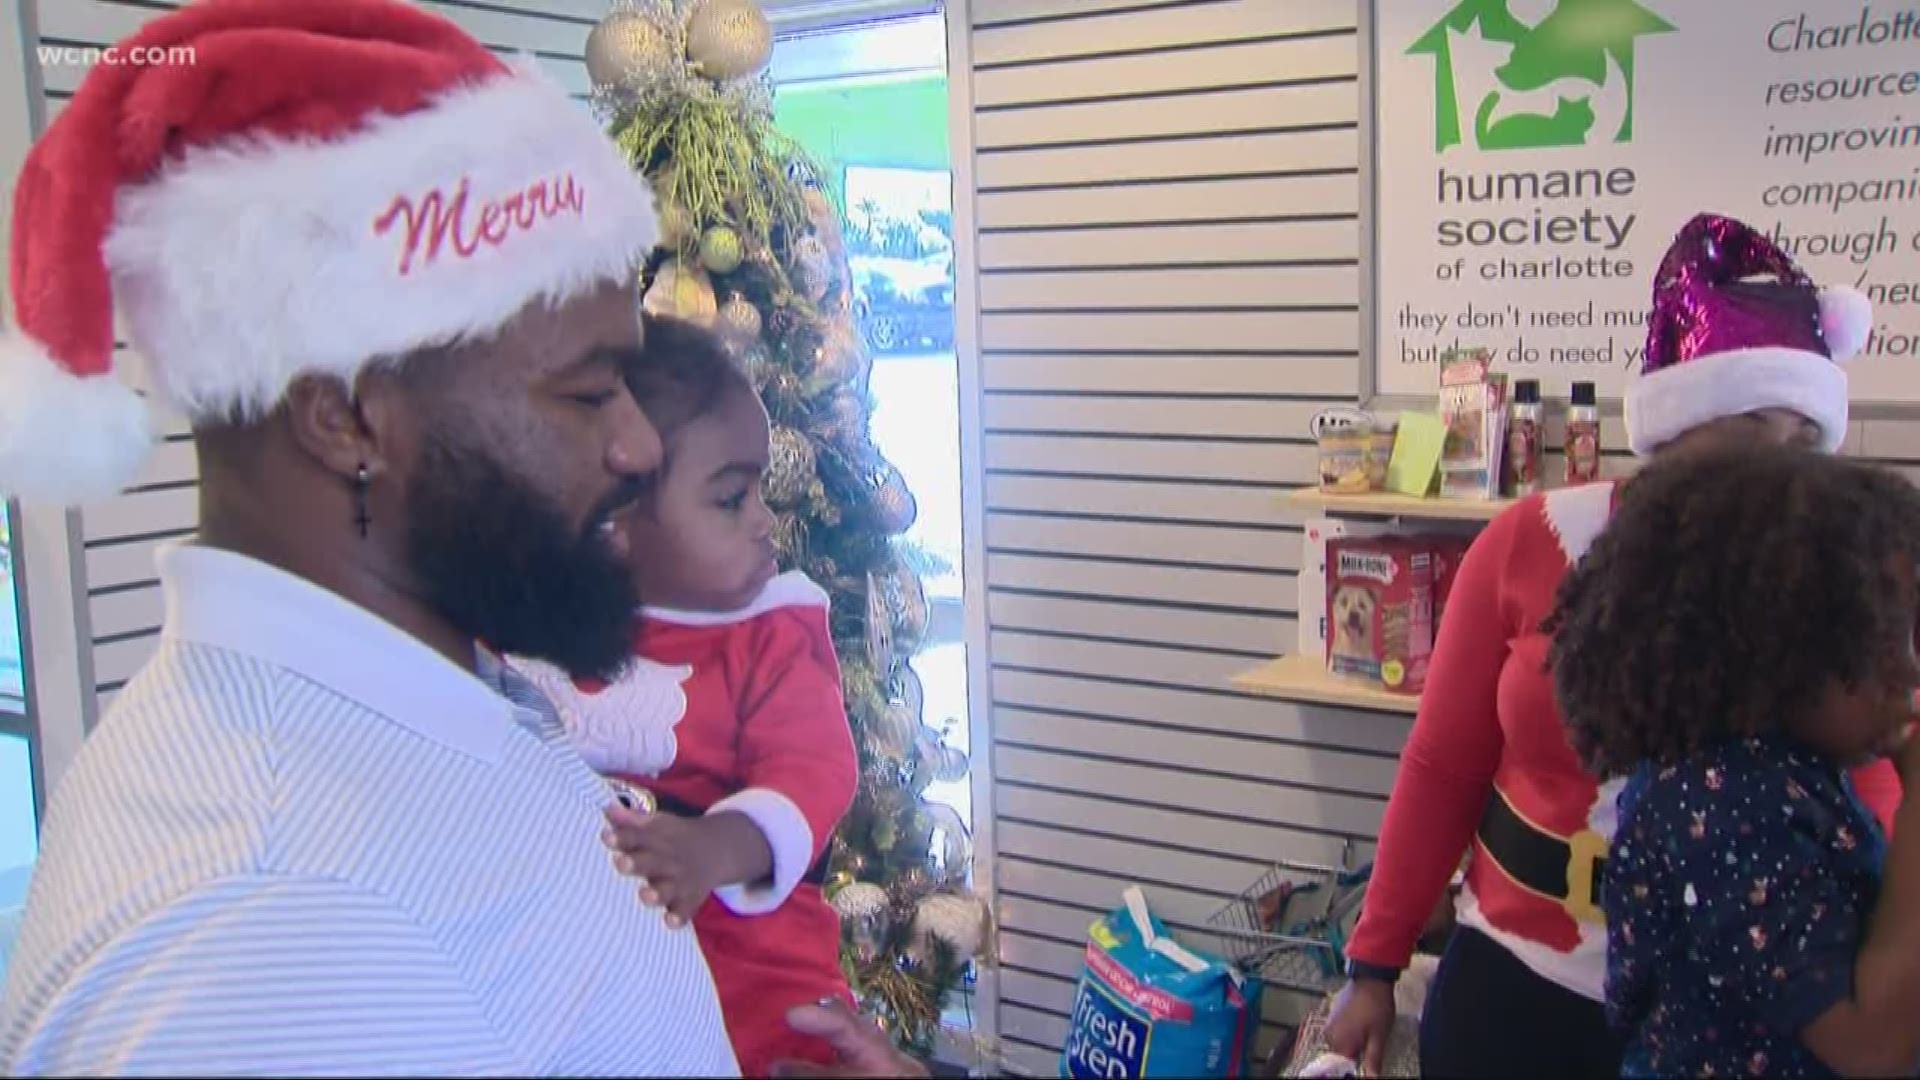 Fozzy Whittaker teamed up with the Humane Society to deliver new pets just in time for Christmas morning.